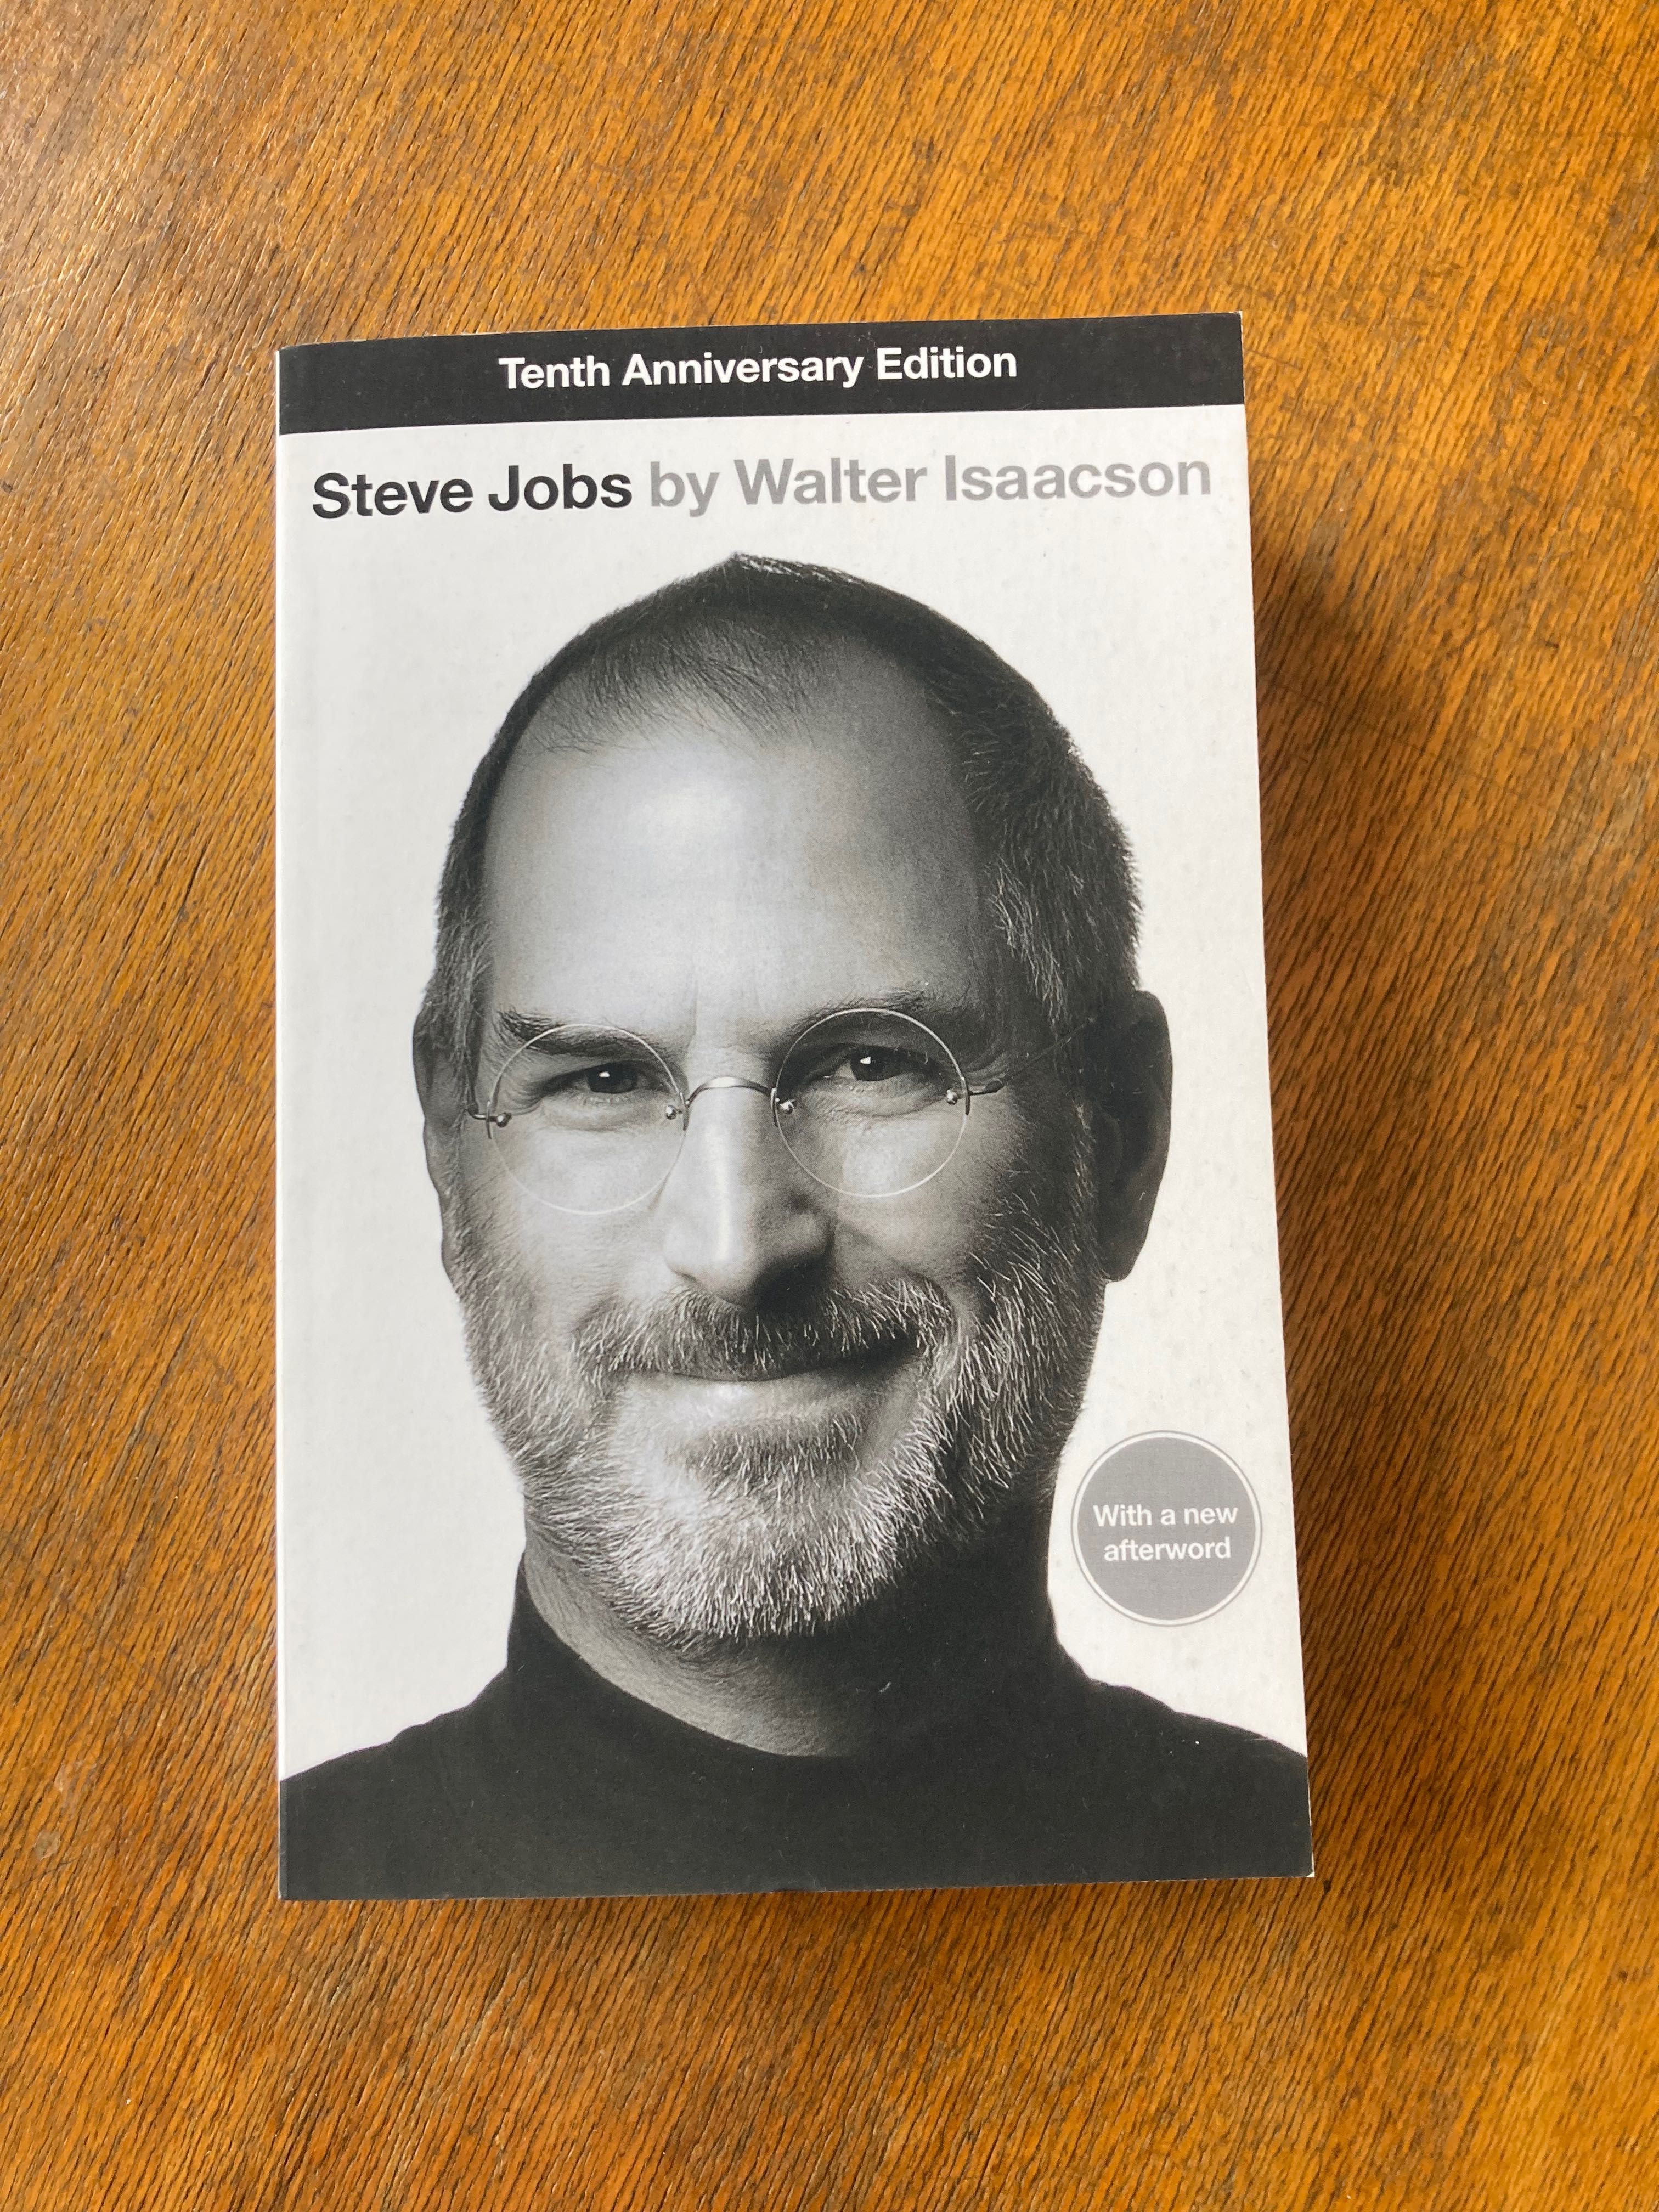 Steve Jobs by Walter Isaacson, new paperback, 10th anniversary edition